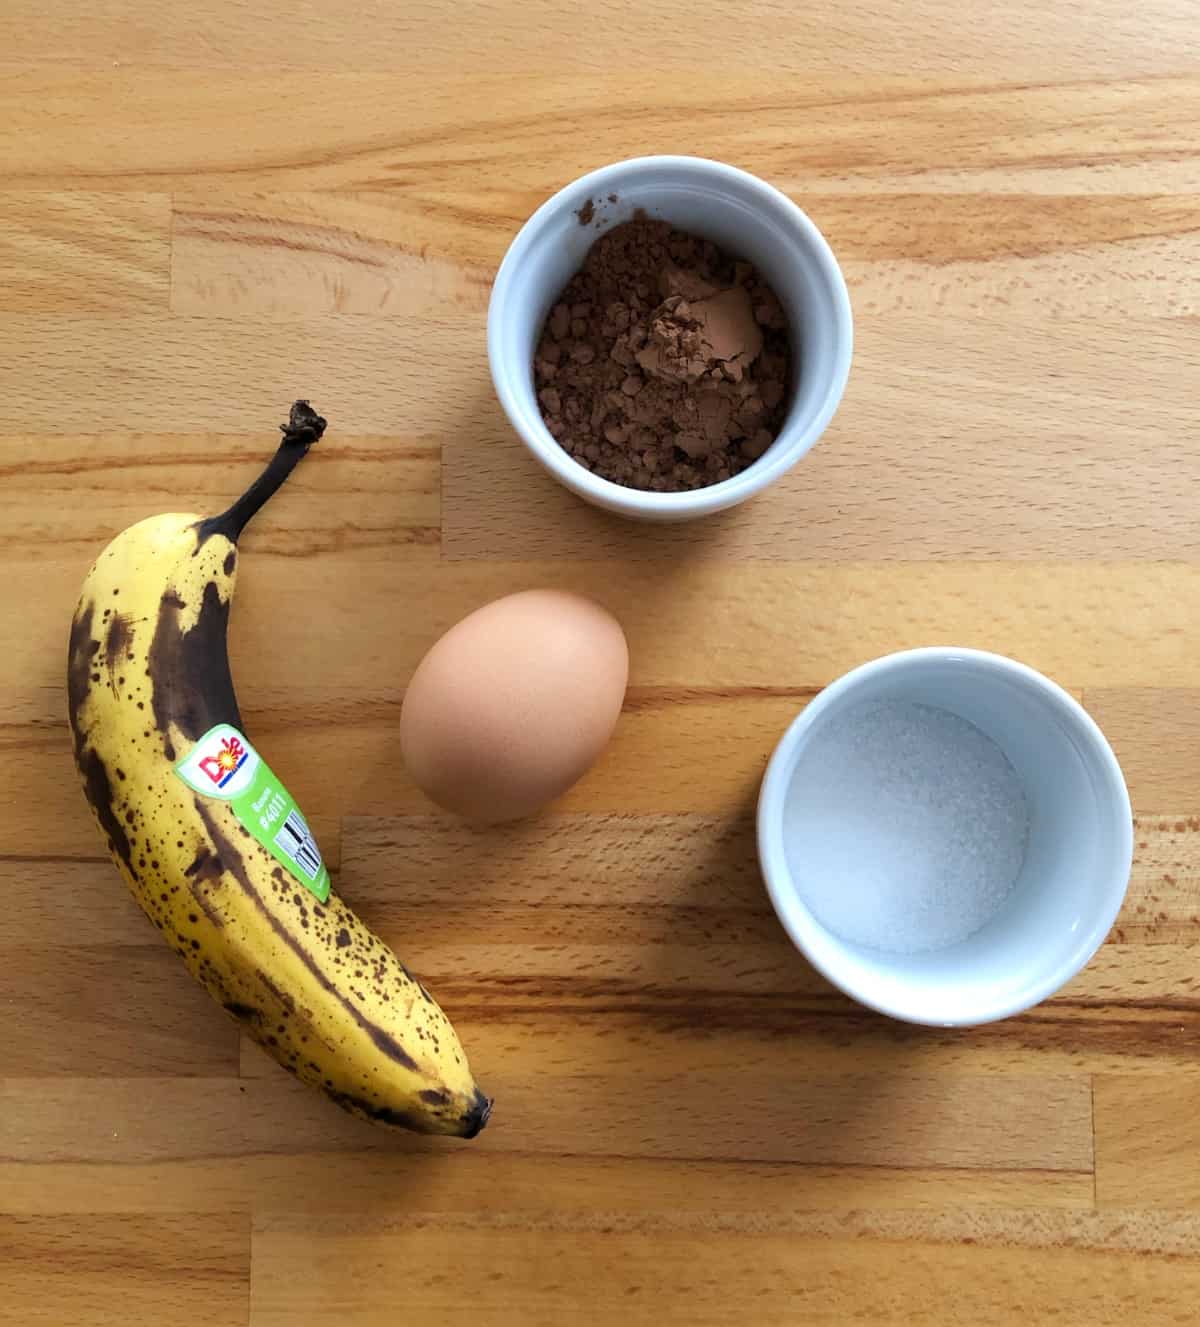 Over-ripe banana, cocoa powder, whole egg and sugar on wooden table.